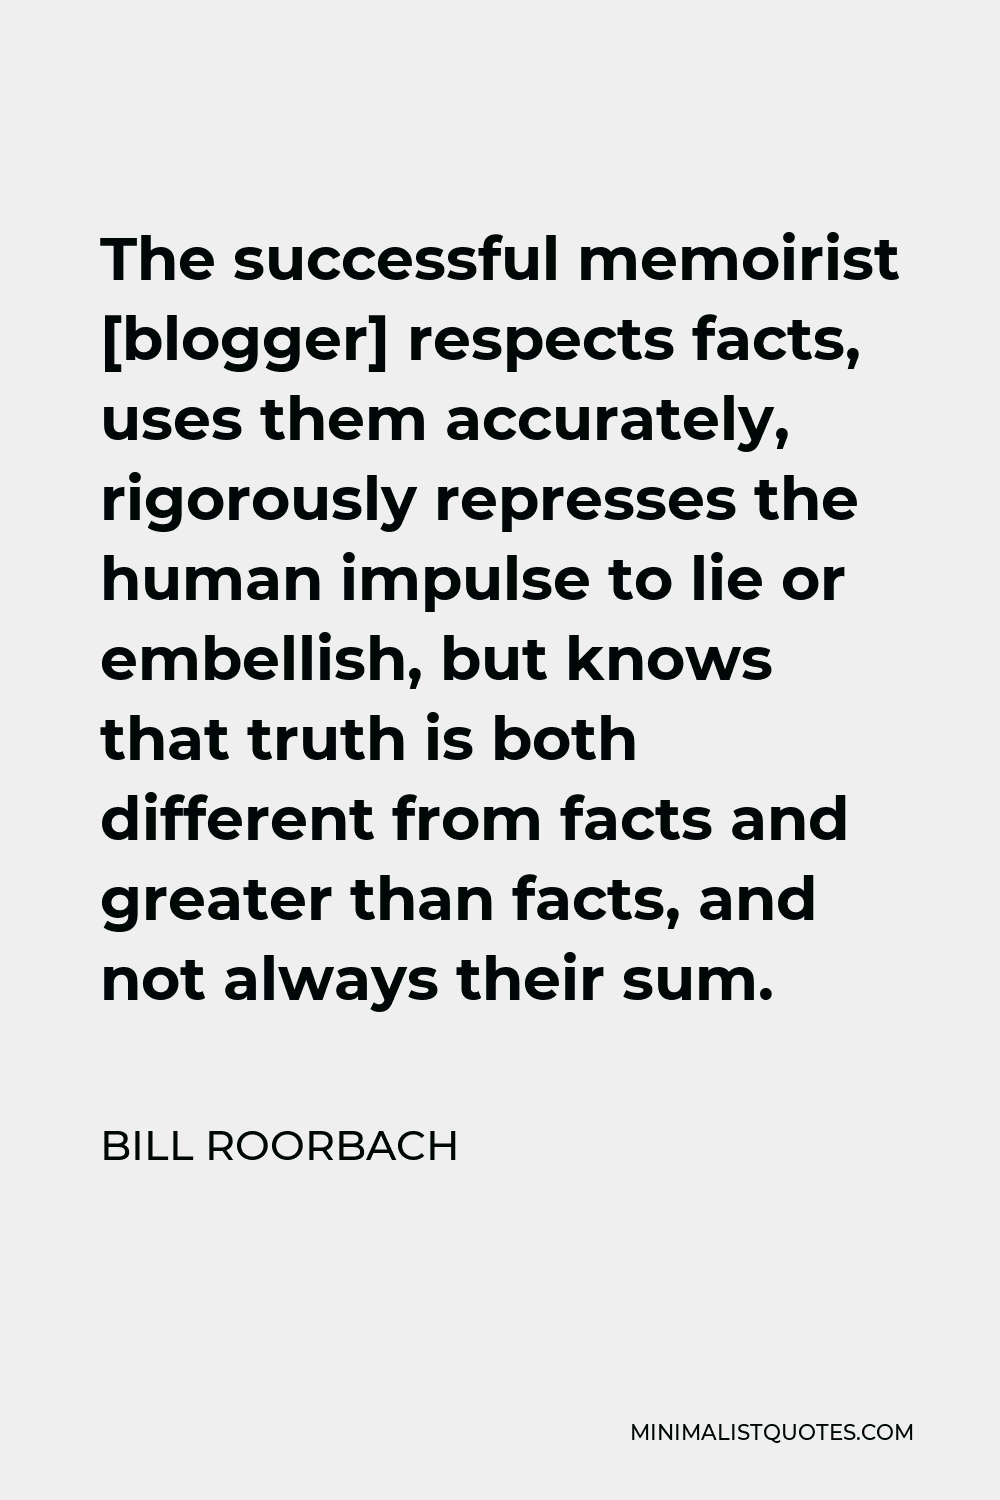 Bill Roorbach Quote - The successful memoirist [blogger] respects facts, uses them accurately, rigorously represses the human impulse to lie or embellish, but knows that truth is both different from facts and greater than facts, and not always their sum.